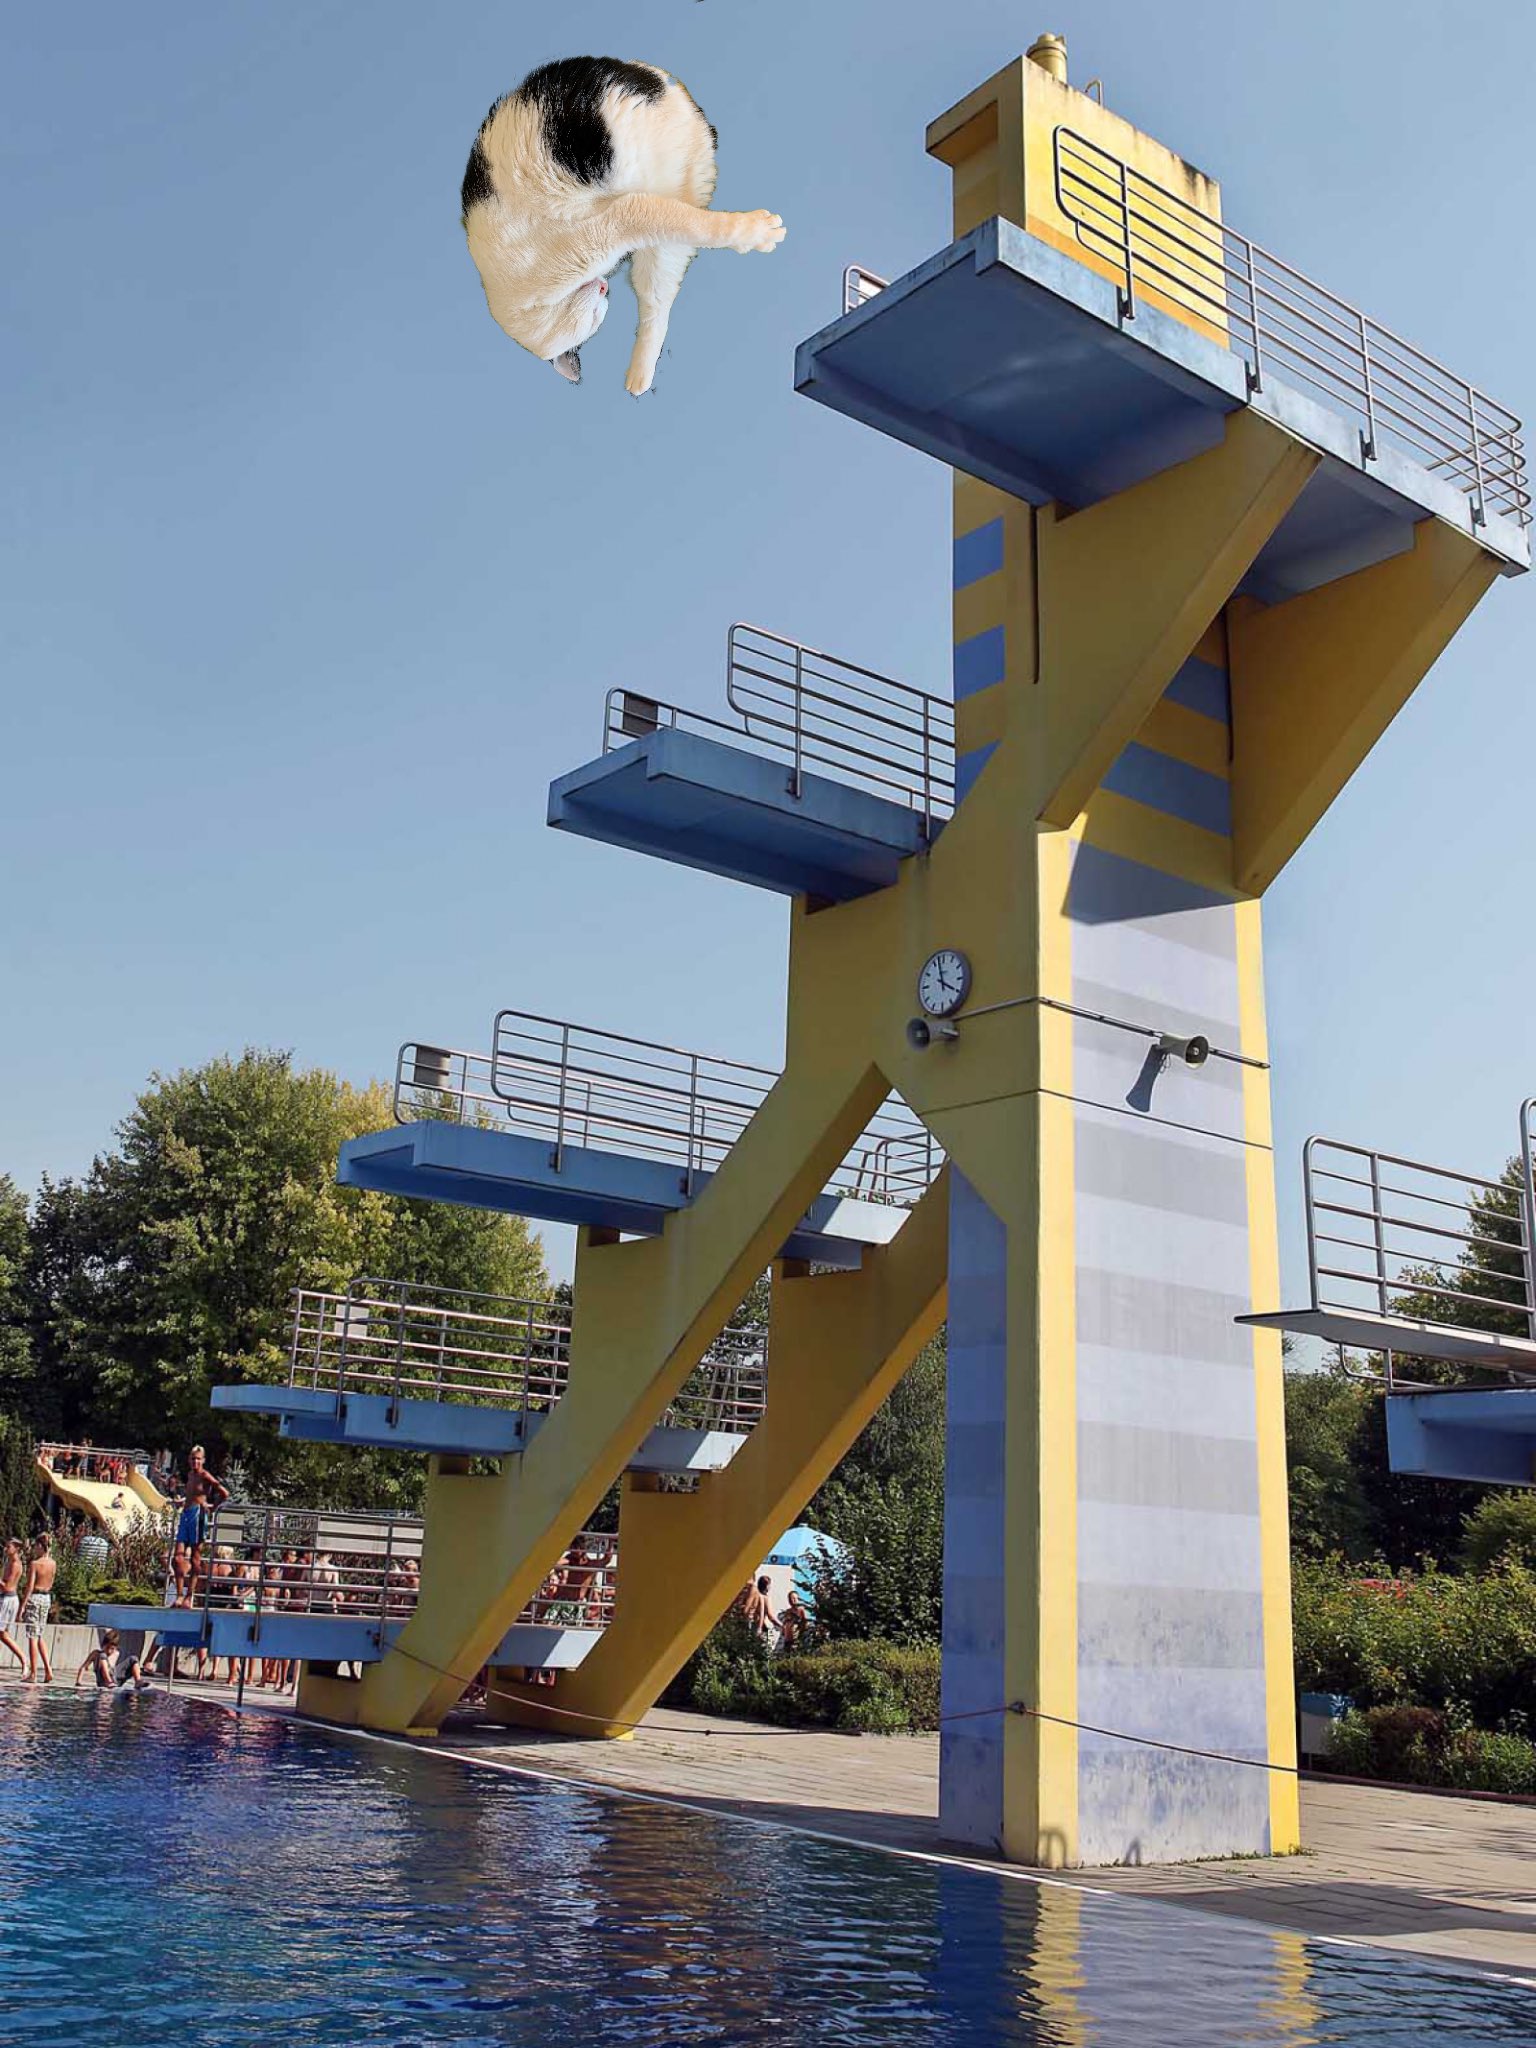 a diving board with a cat in the air